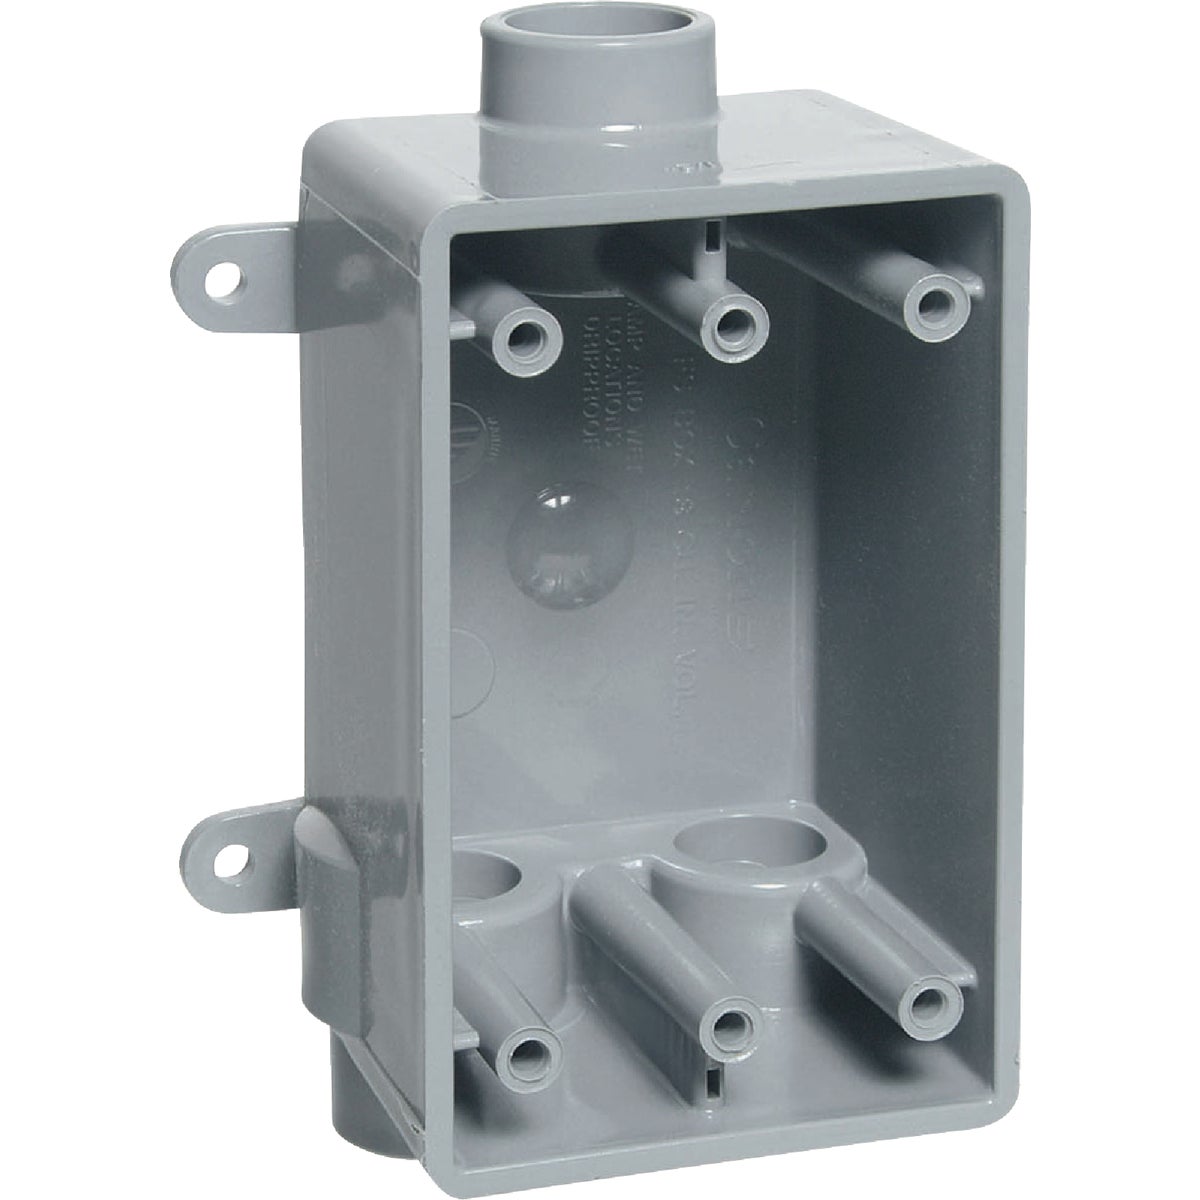 Item 550833, Type FSCC non-metallic switch box for exposed applications.